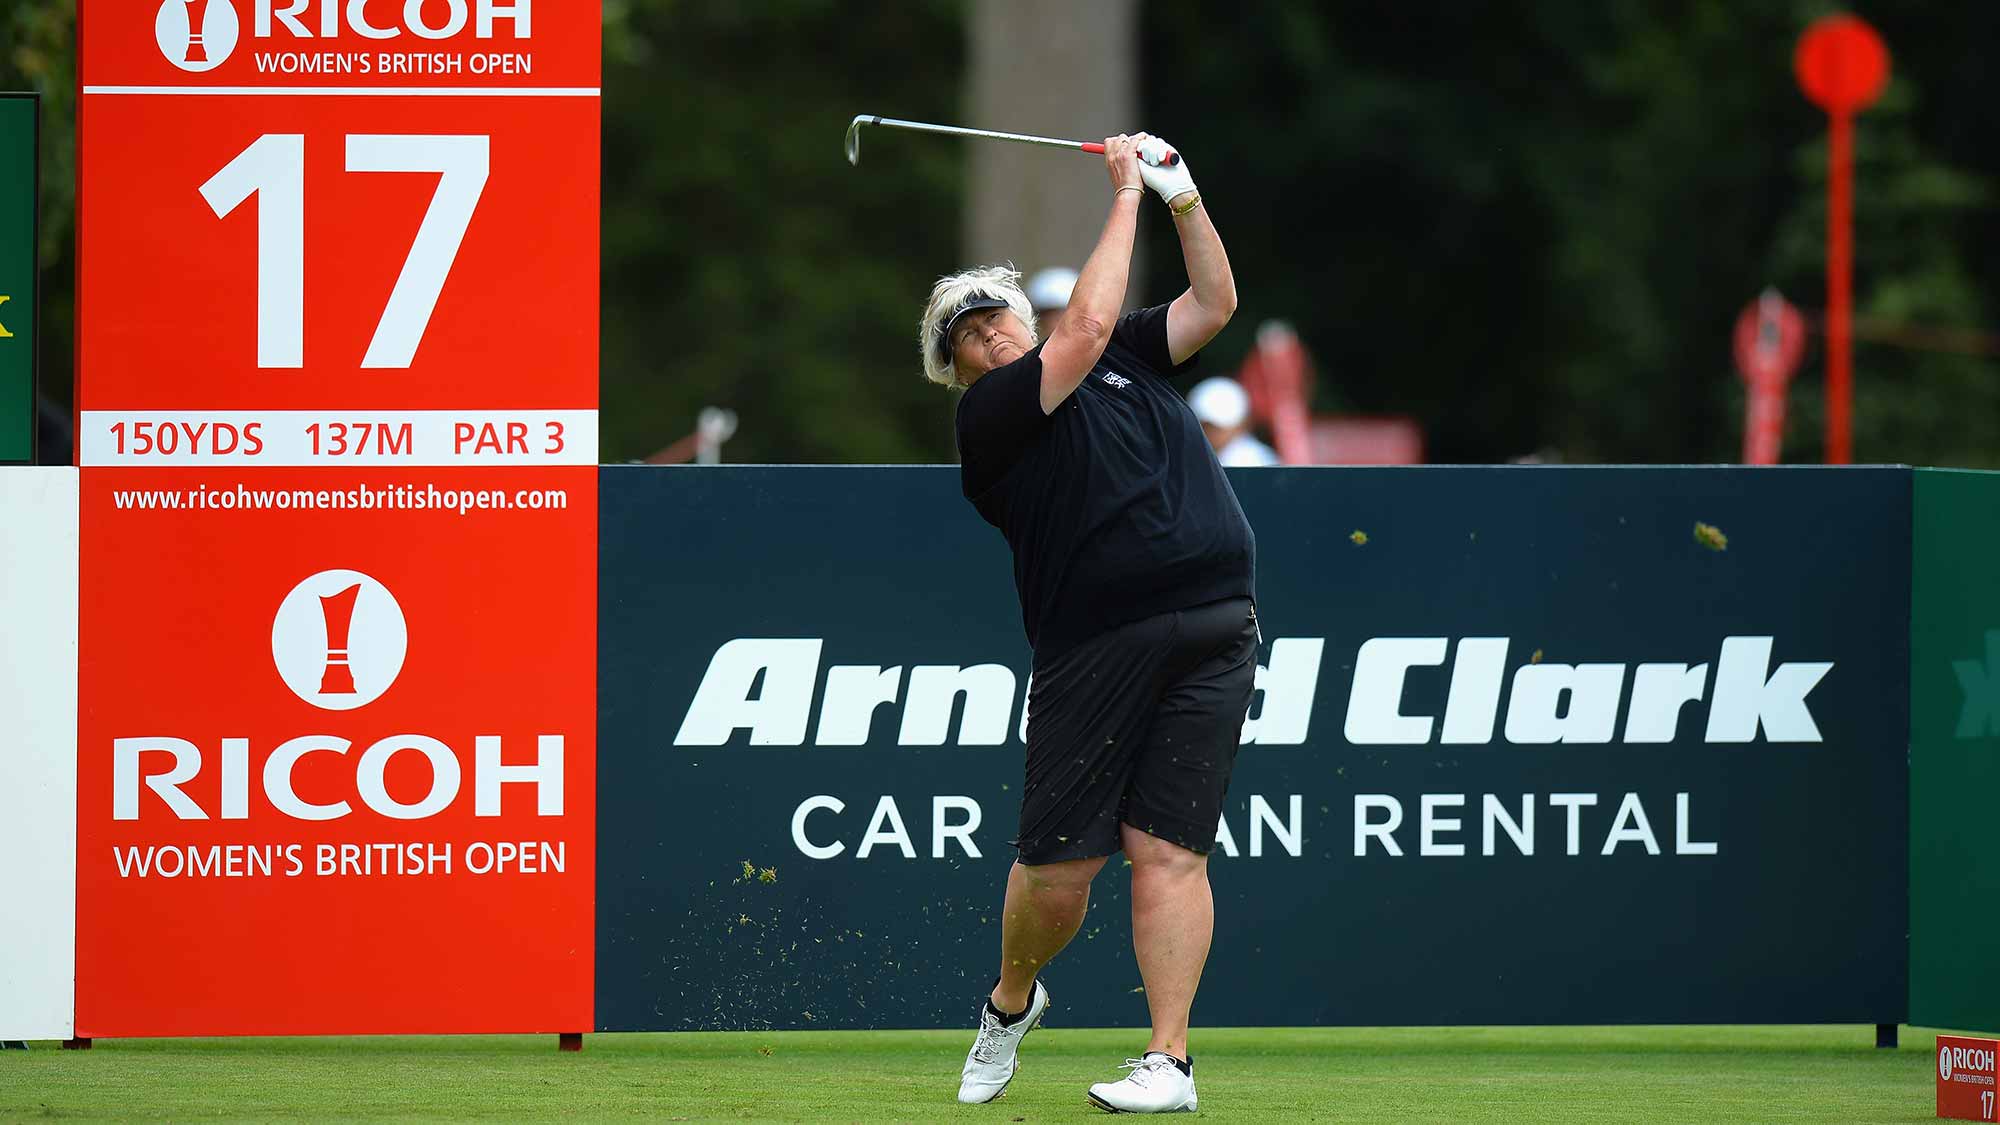 Laura Davies of England plays her first shot on the 17th tee fairway during the Ricoh Women's British Open